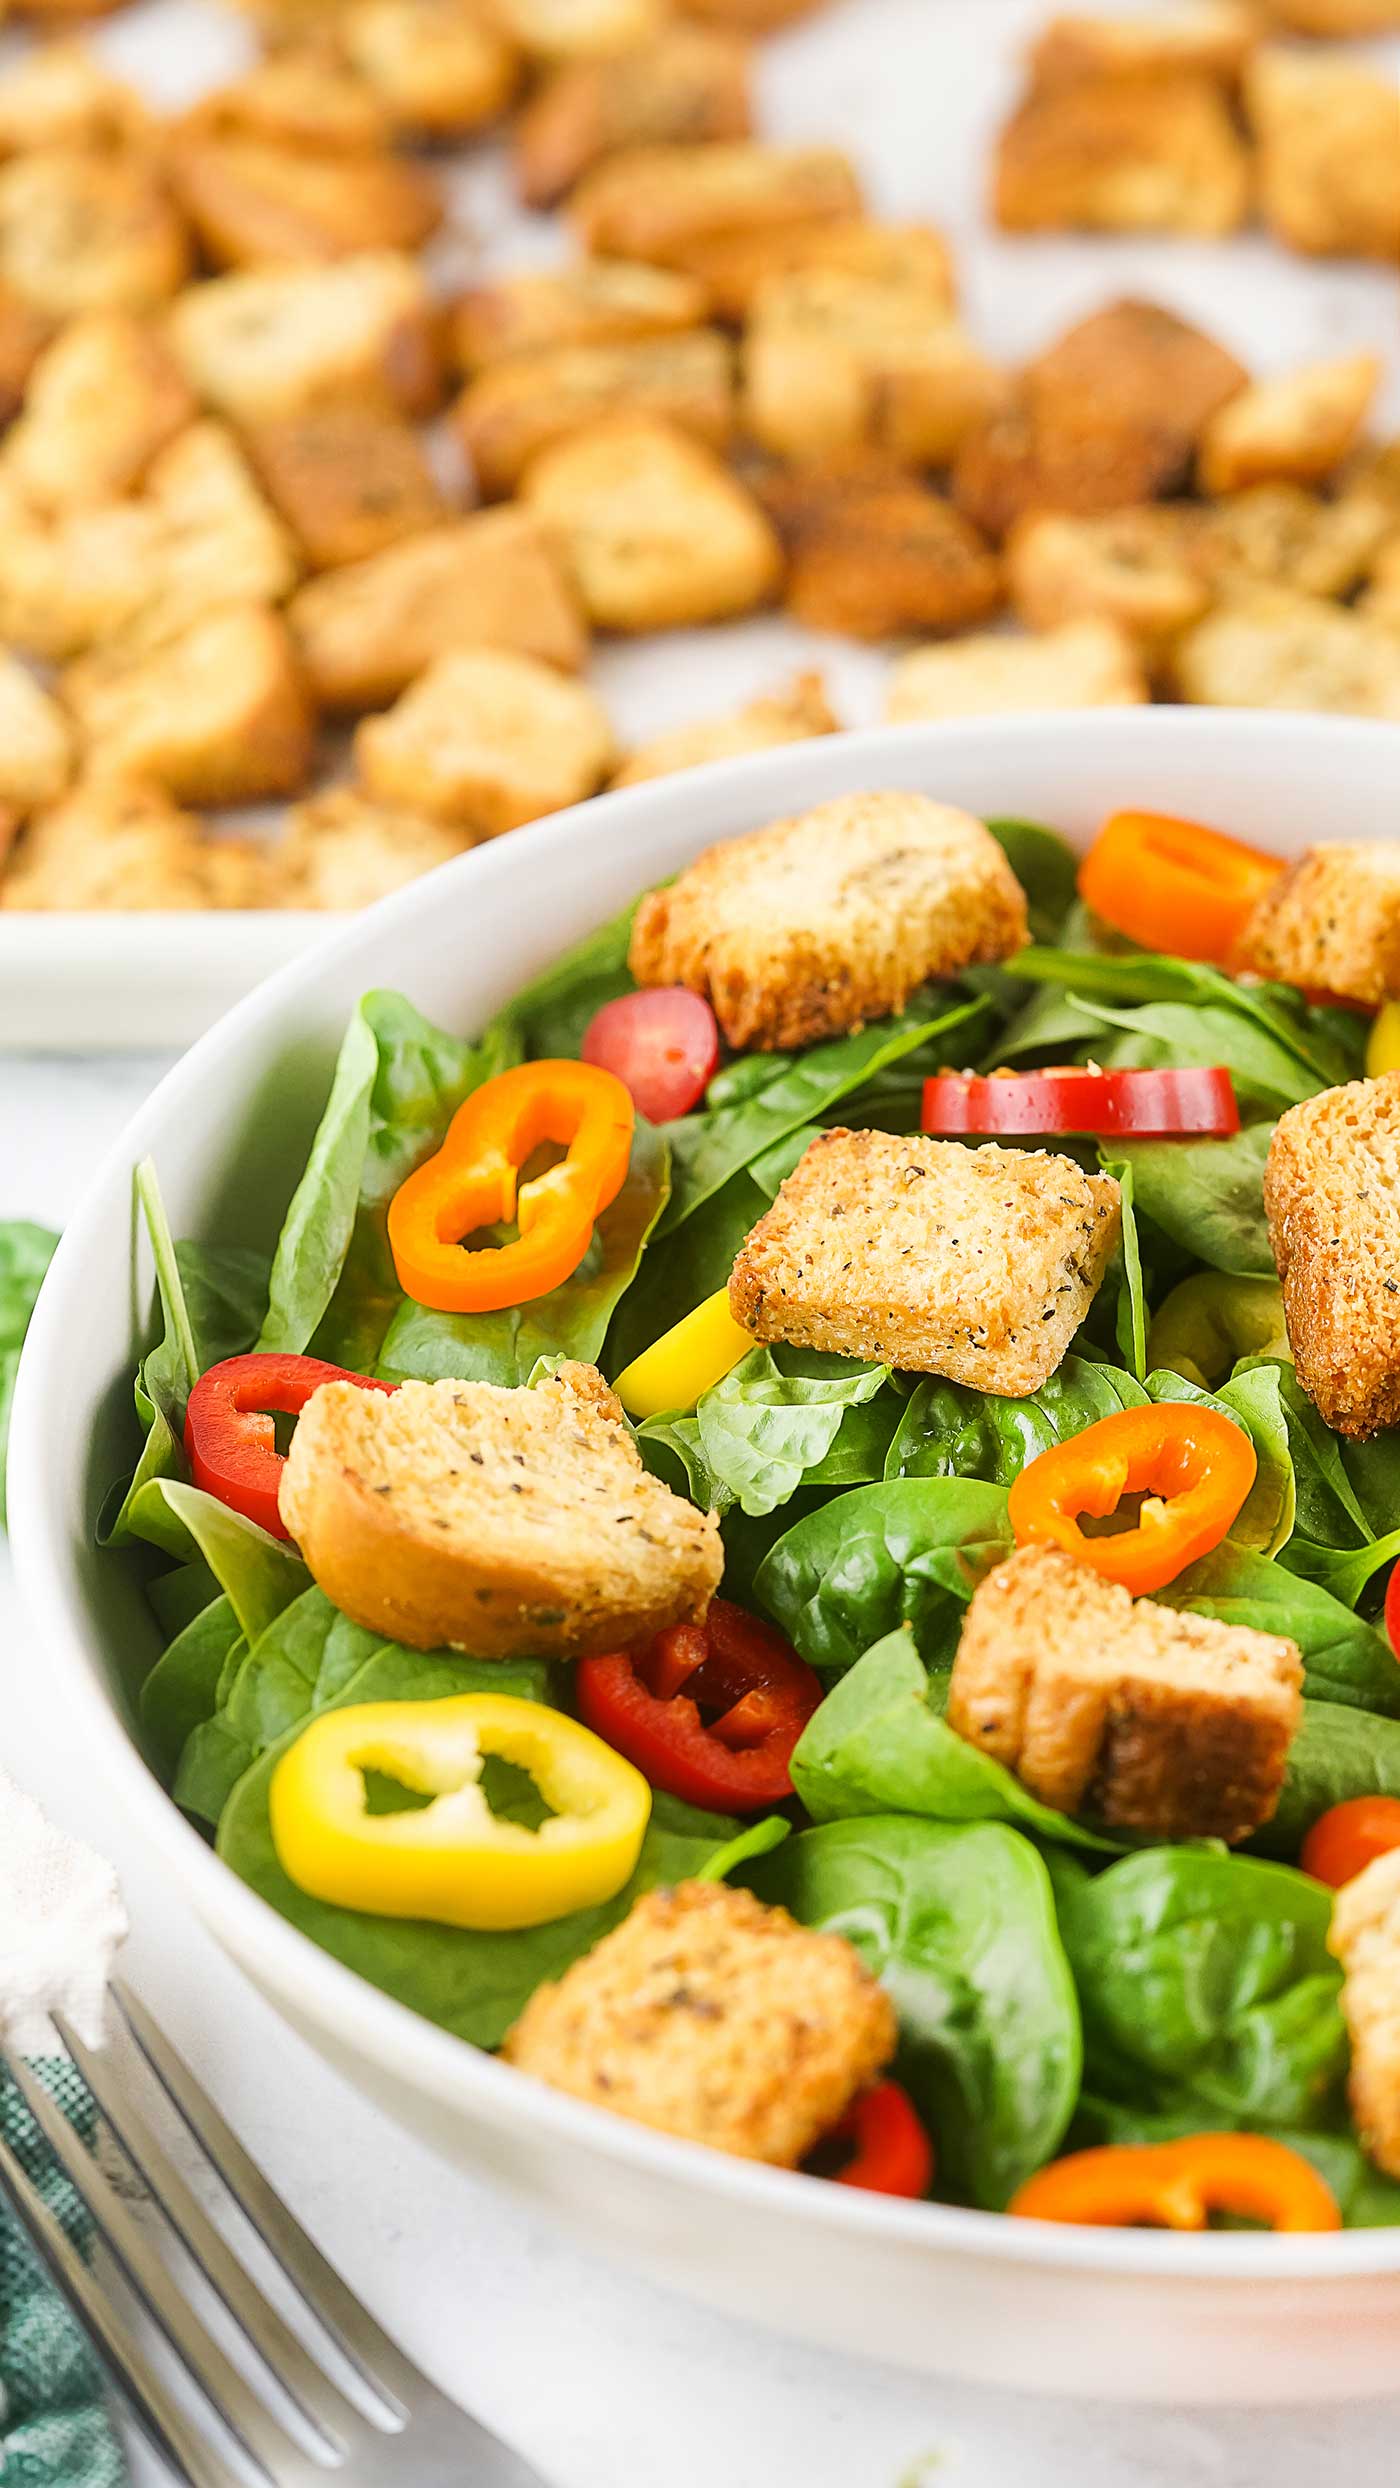 Salad with peppers and croutons